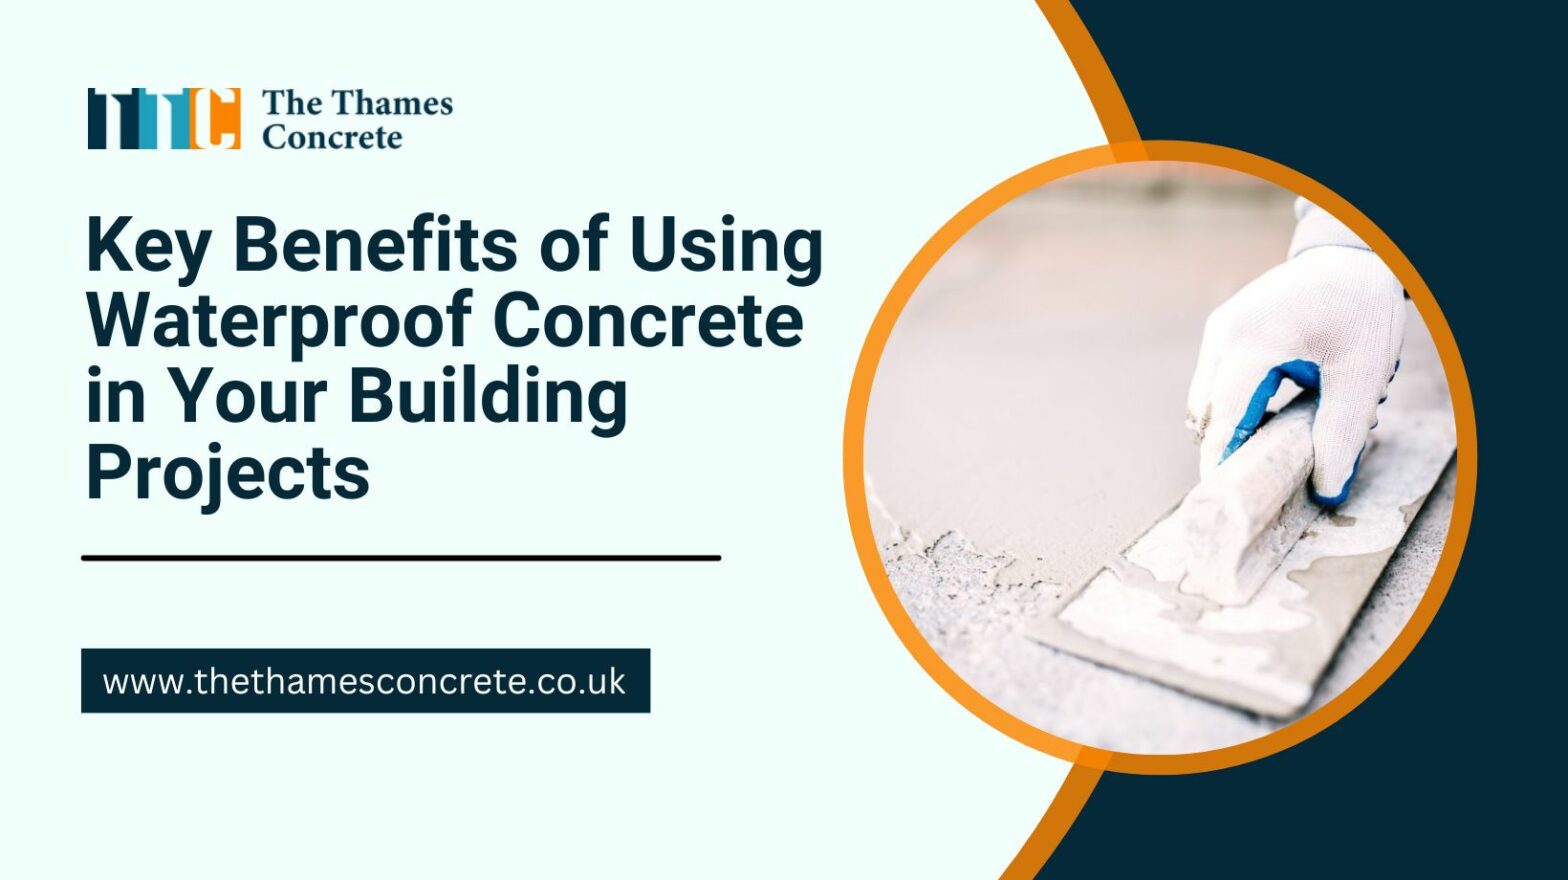 Key Benefits of Using Waterproof Concrete in Your Building Projects